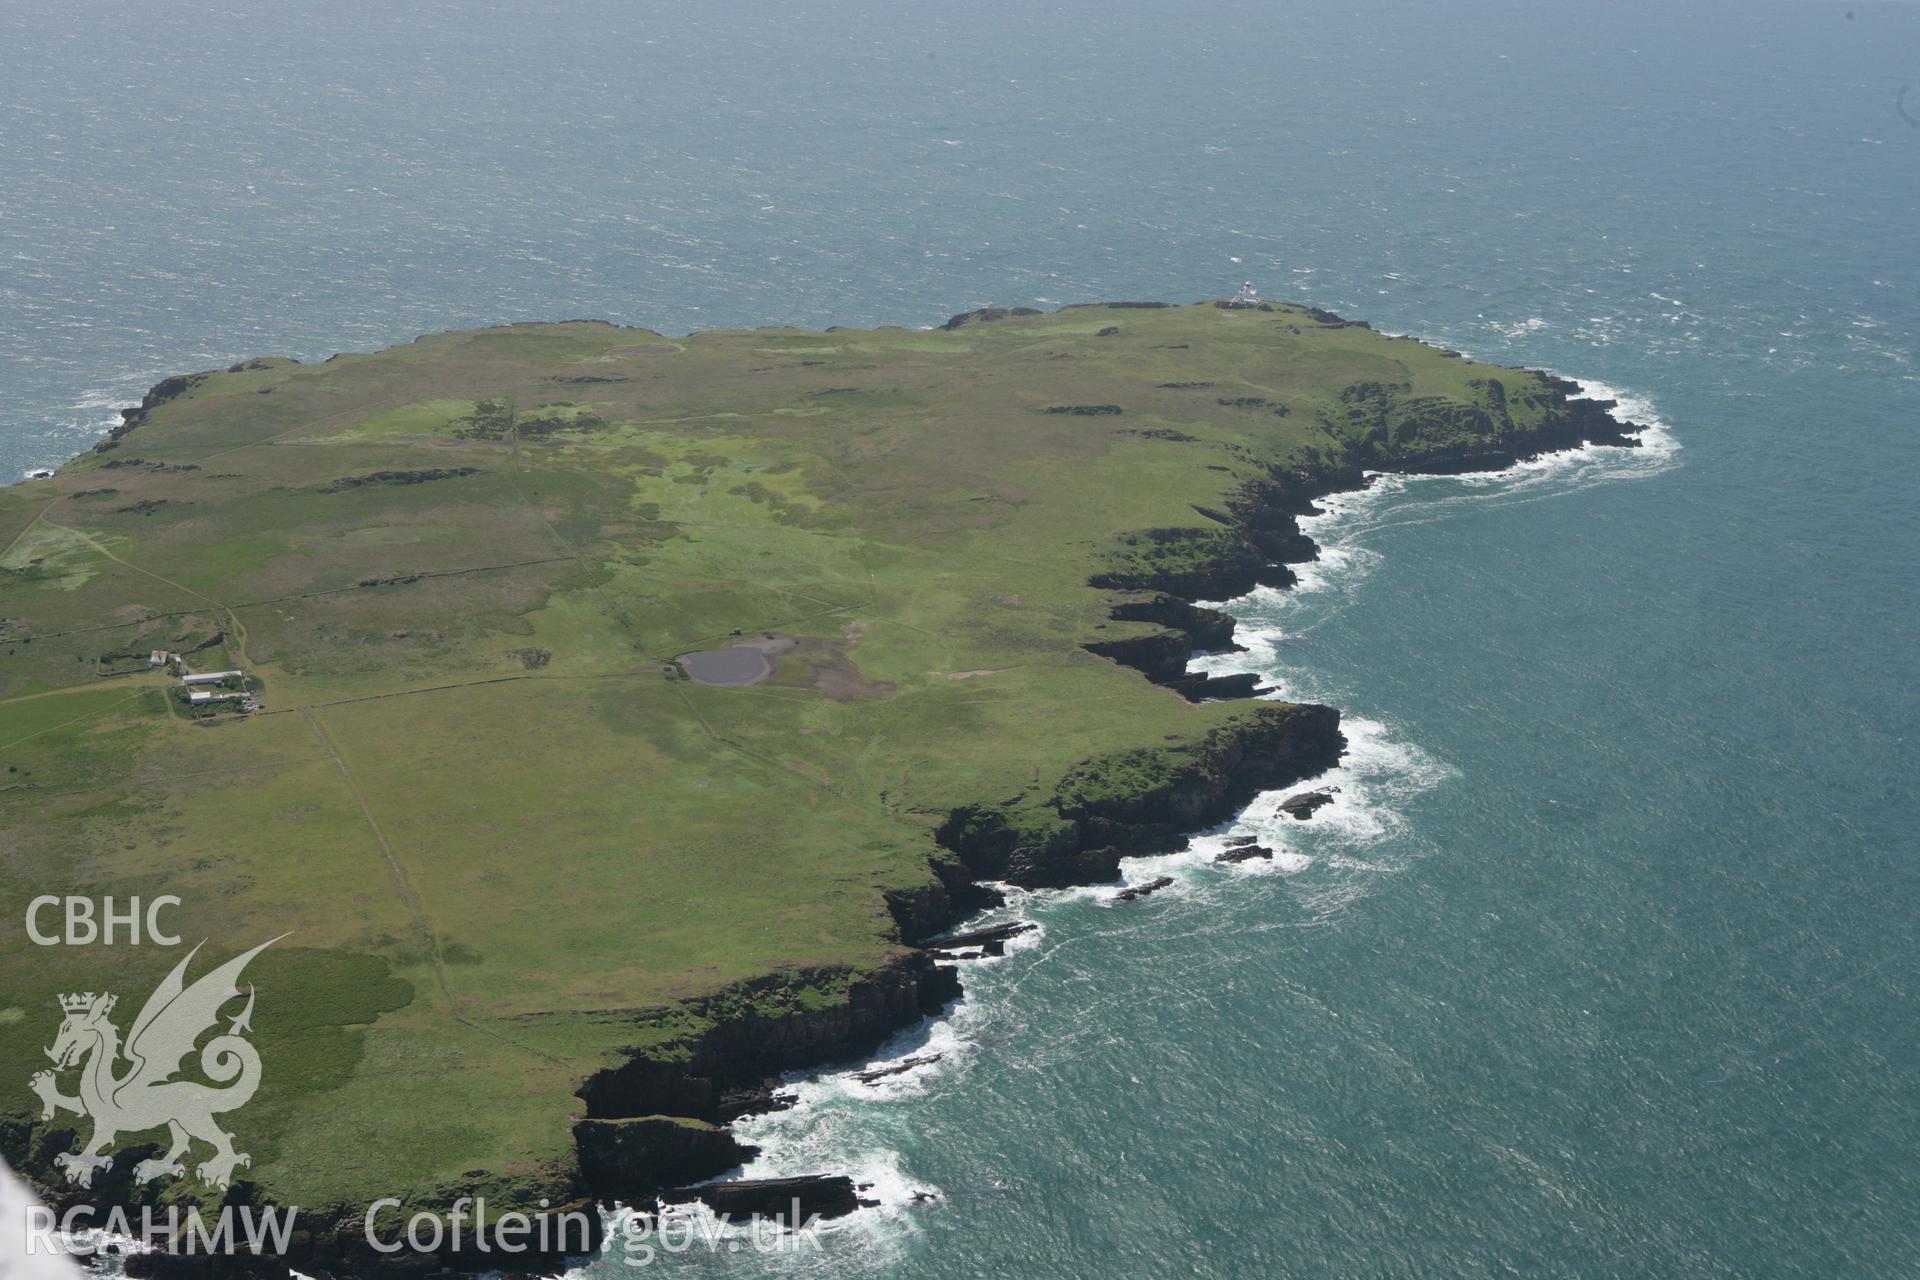 RCAHMW colour oblique photograph of Skokholm Island. Taken by Toby Driver on 24/05/2011.